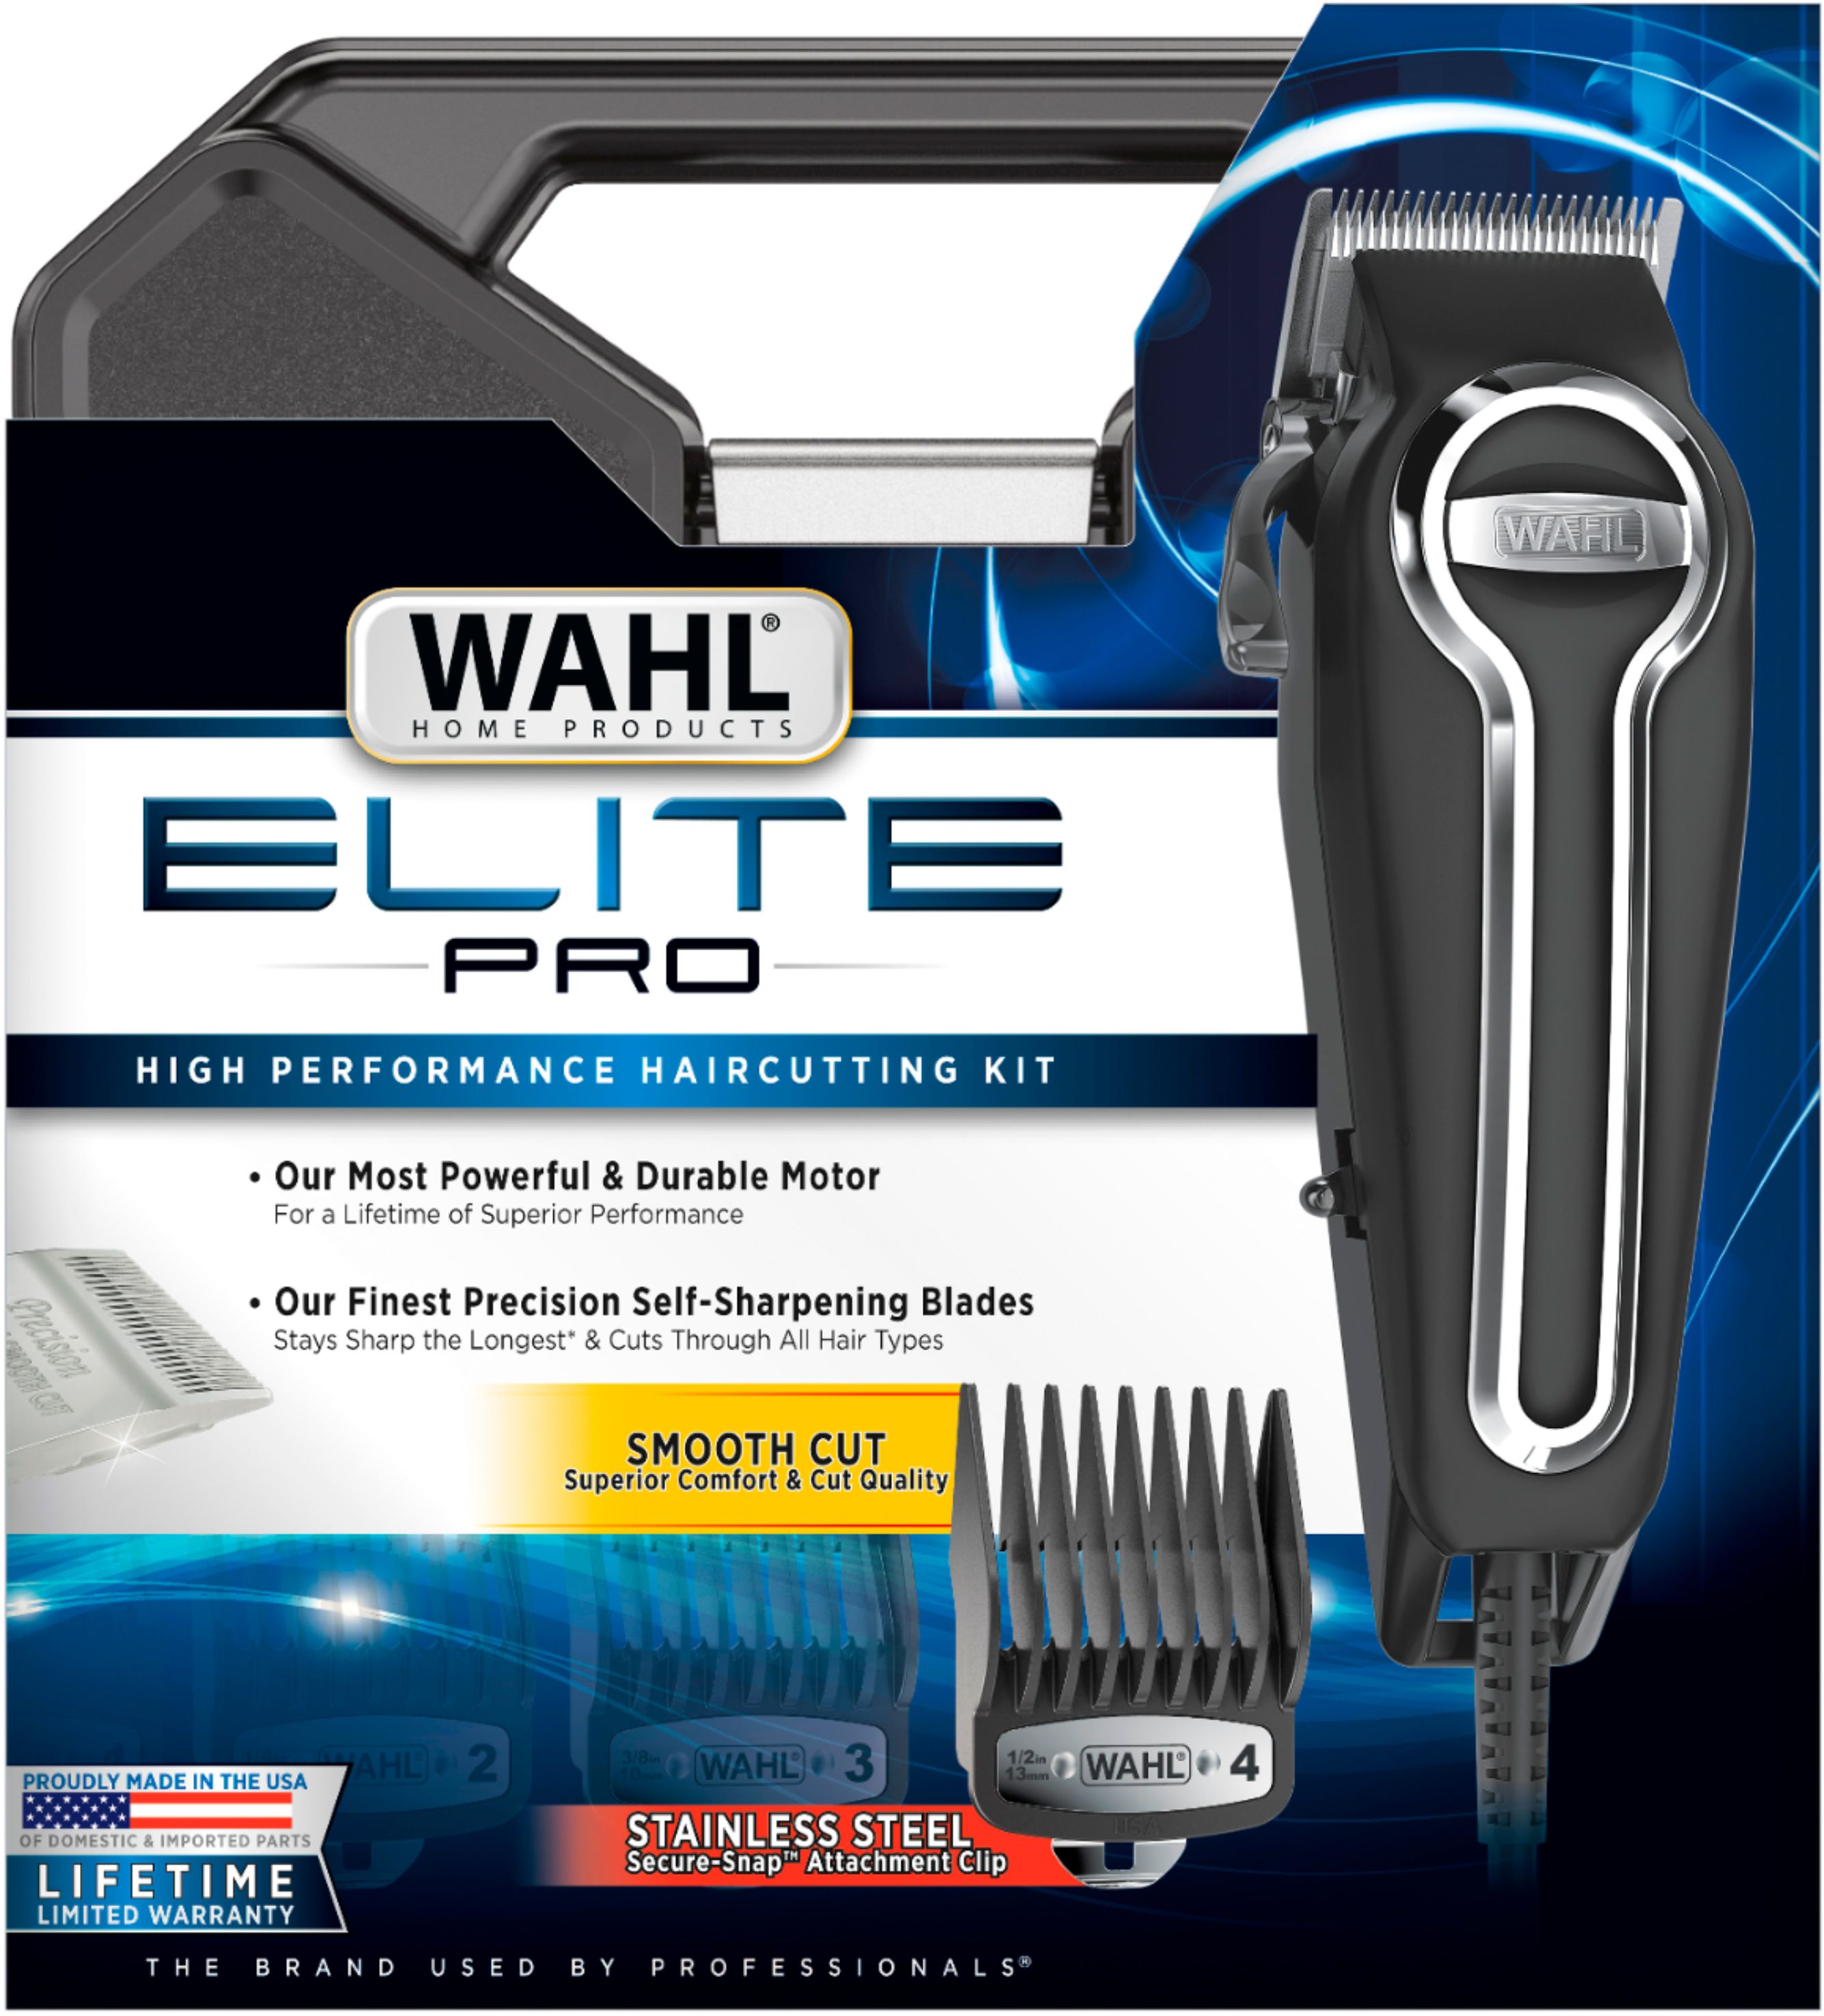 hair clippers babyliss powerlight